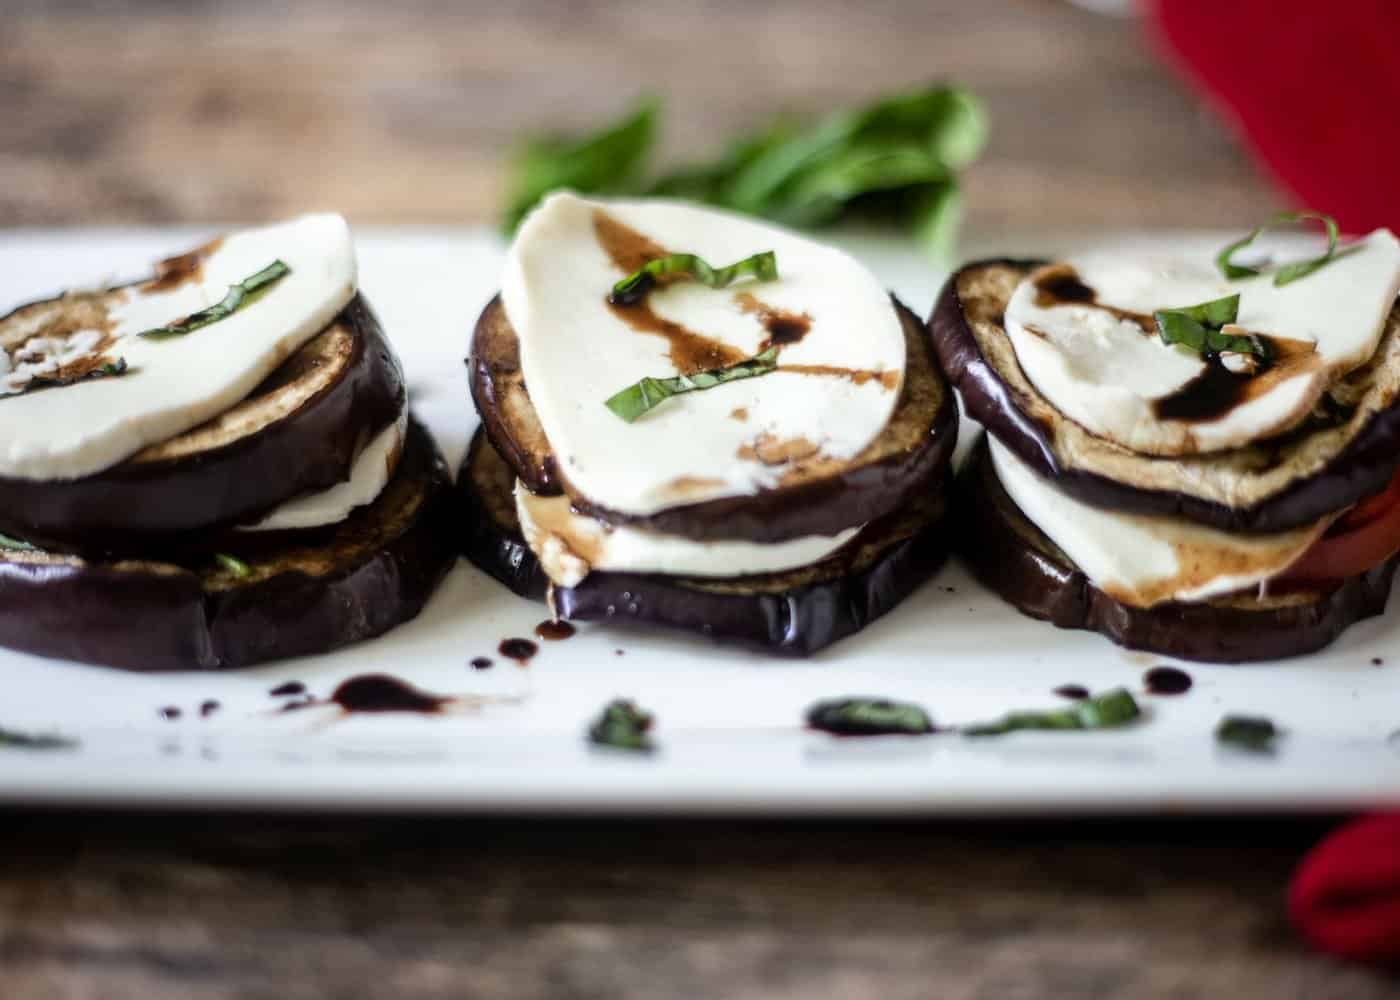 Grilled eggplant, tomato, basil, and fresh mozzarella stacked with a balsamic glaze drizzled on the eggplant stacks.